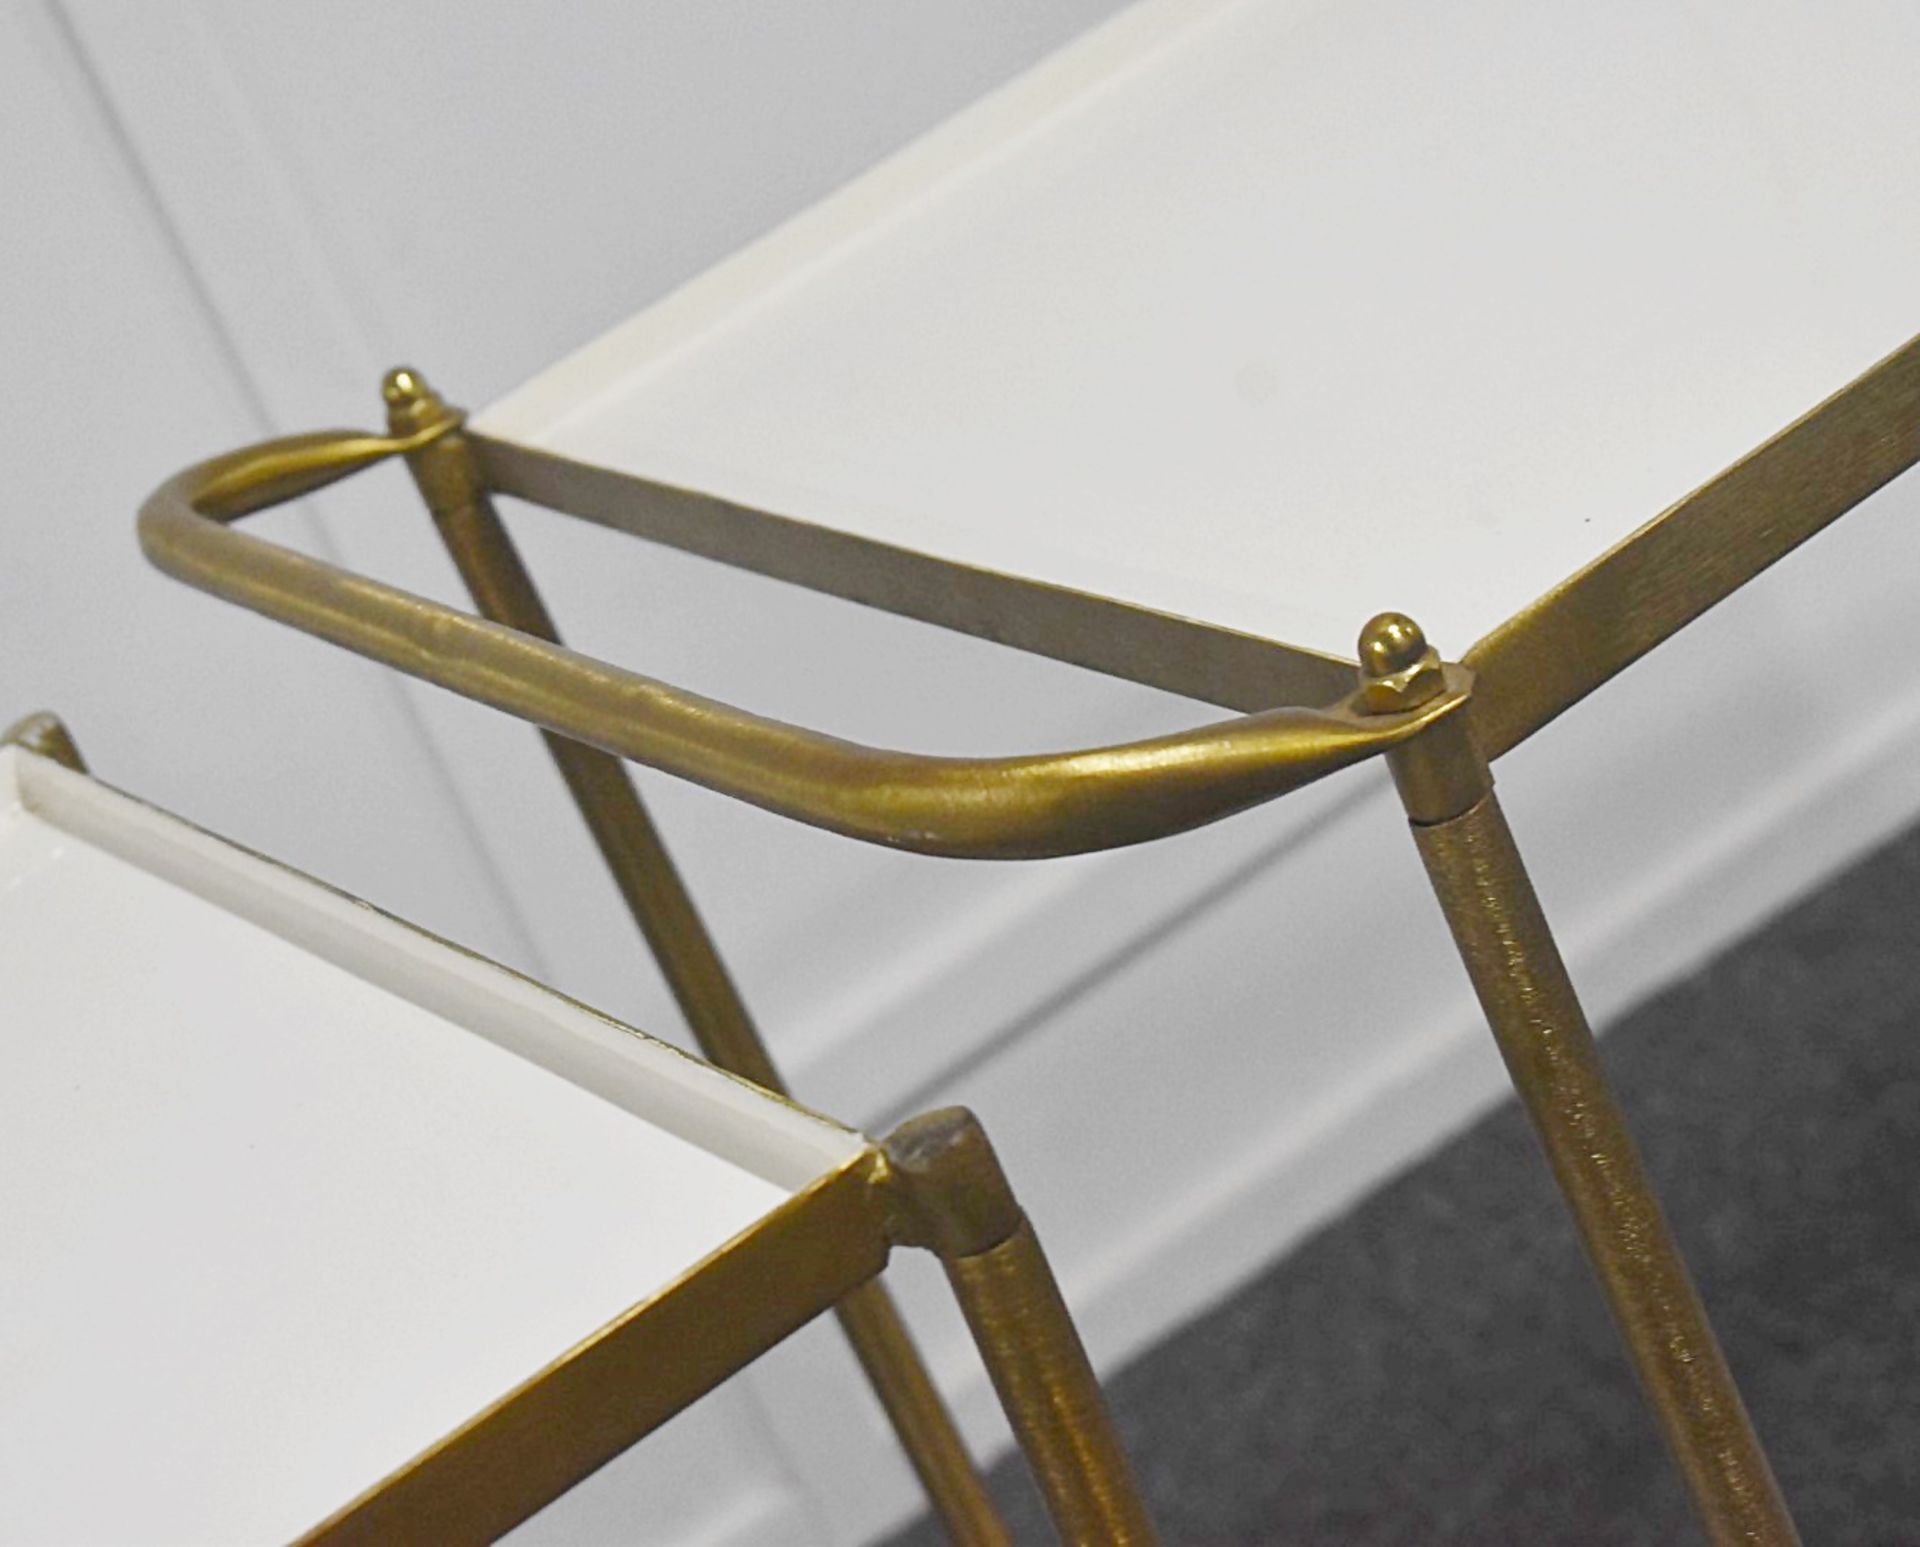 1 x Retro 1960s-style Solid Brass Drink & Dessert Trolley Bar Cart on Castors - Recently Removed - Image 3 of 7